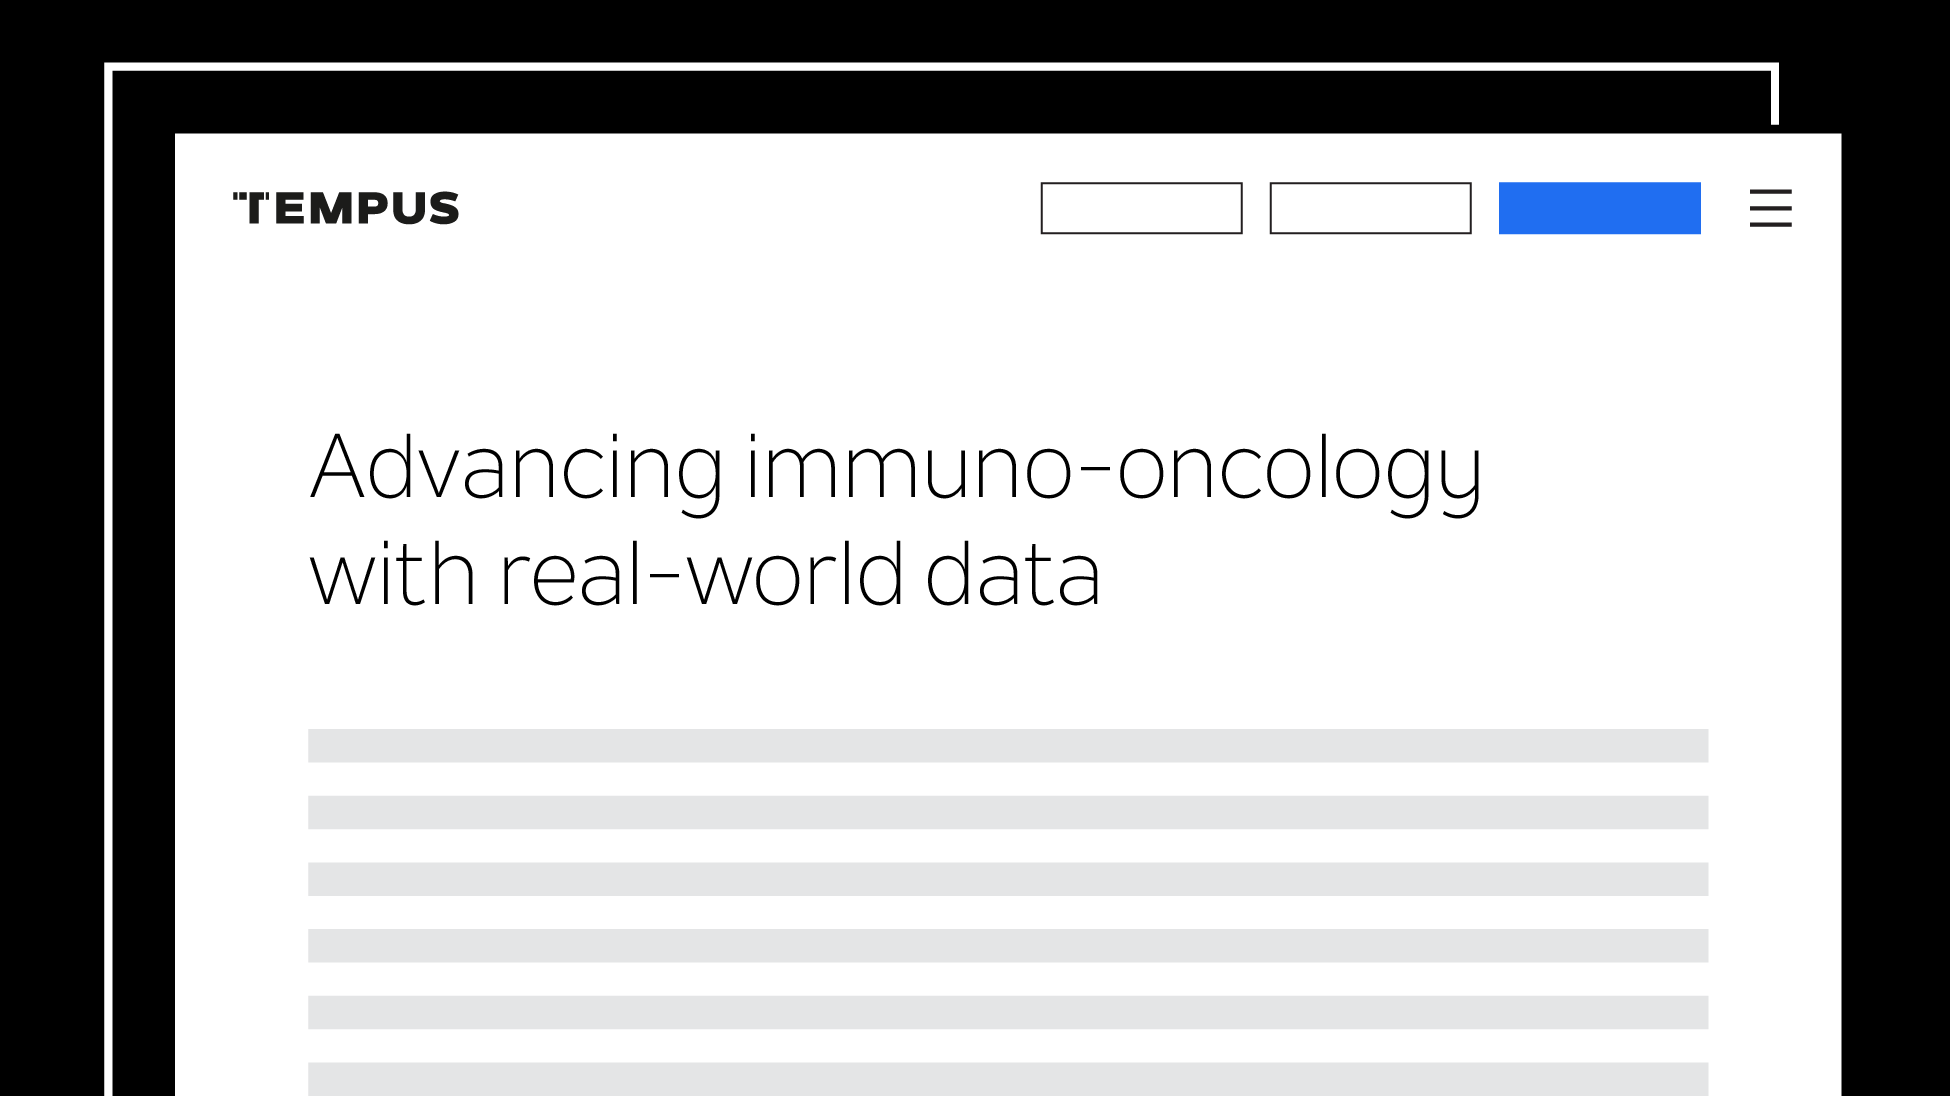 Advancing immuno-oncology with real-world data